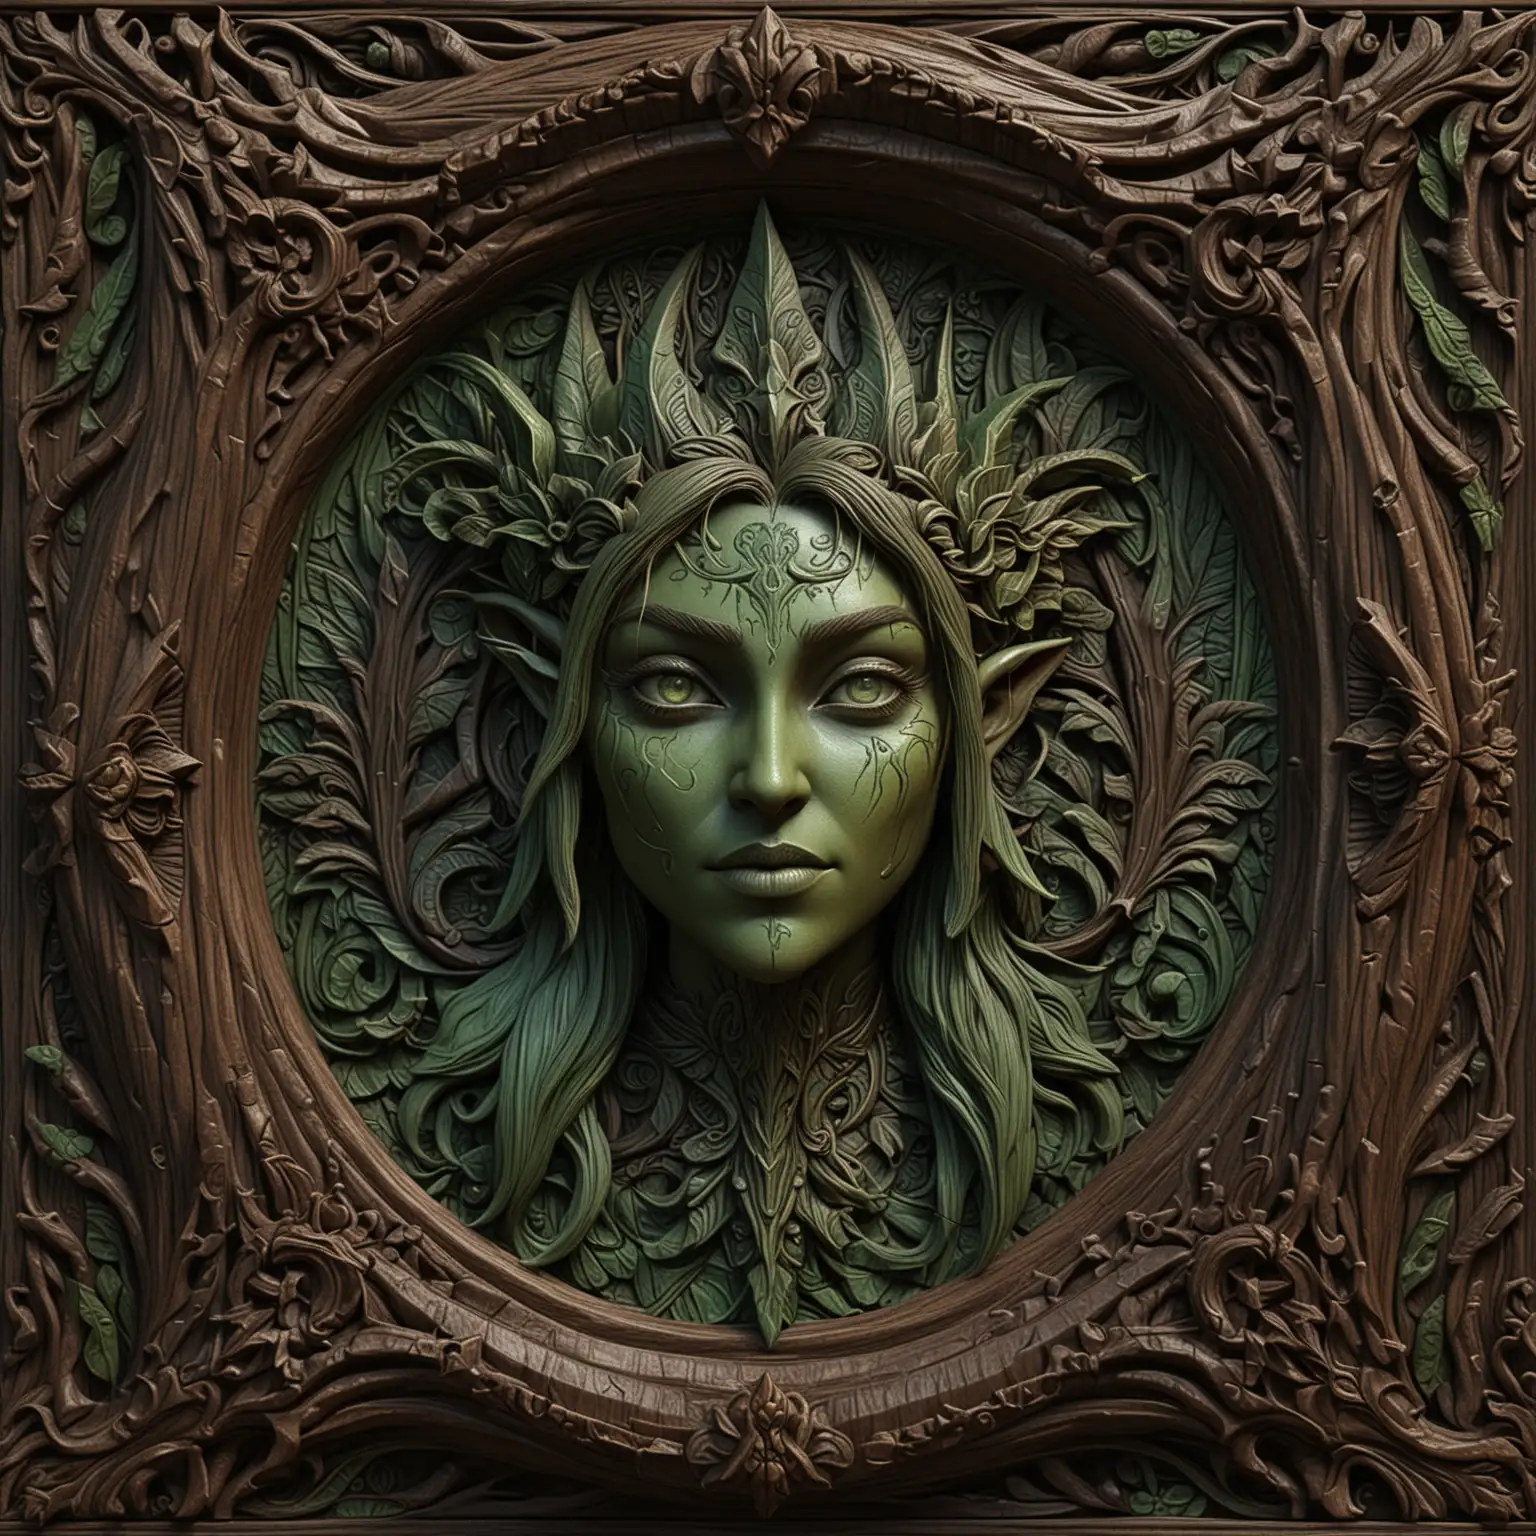 3D SEAMLESS TEXTURE, DARK CARVED WOOD WITH A CARVED WOOD FRAME, FEATURING AN INTRICATE CARVING IN WOOD WITH TOUCHES OF GREEN, FULL BODY OF A NIGHT ELF FROM WORLD OF WARCRAFT
